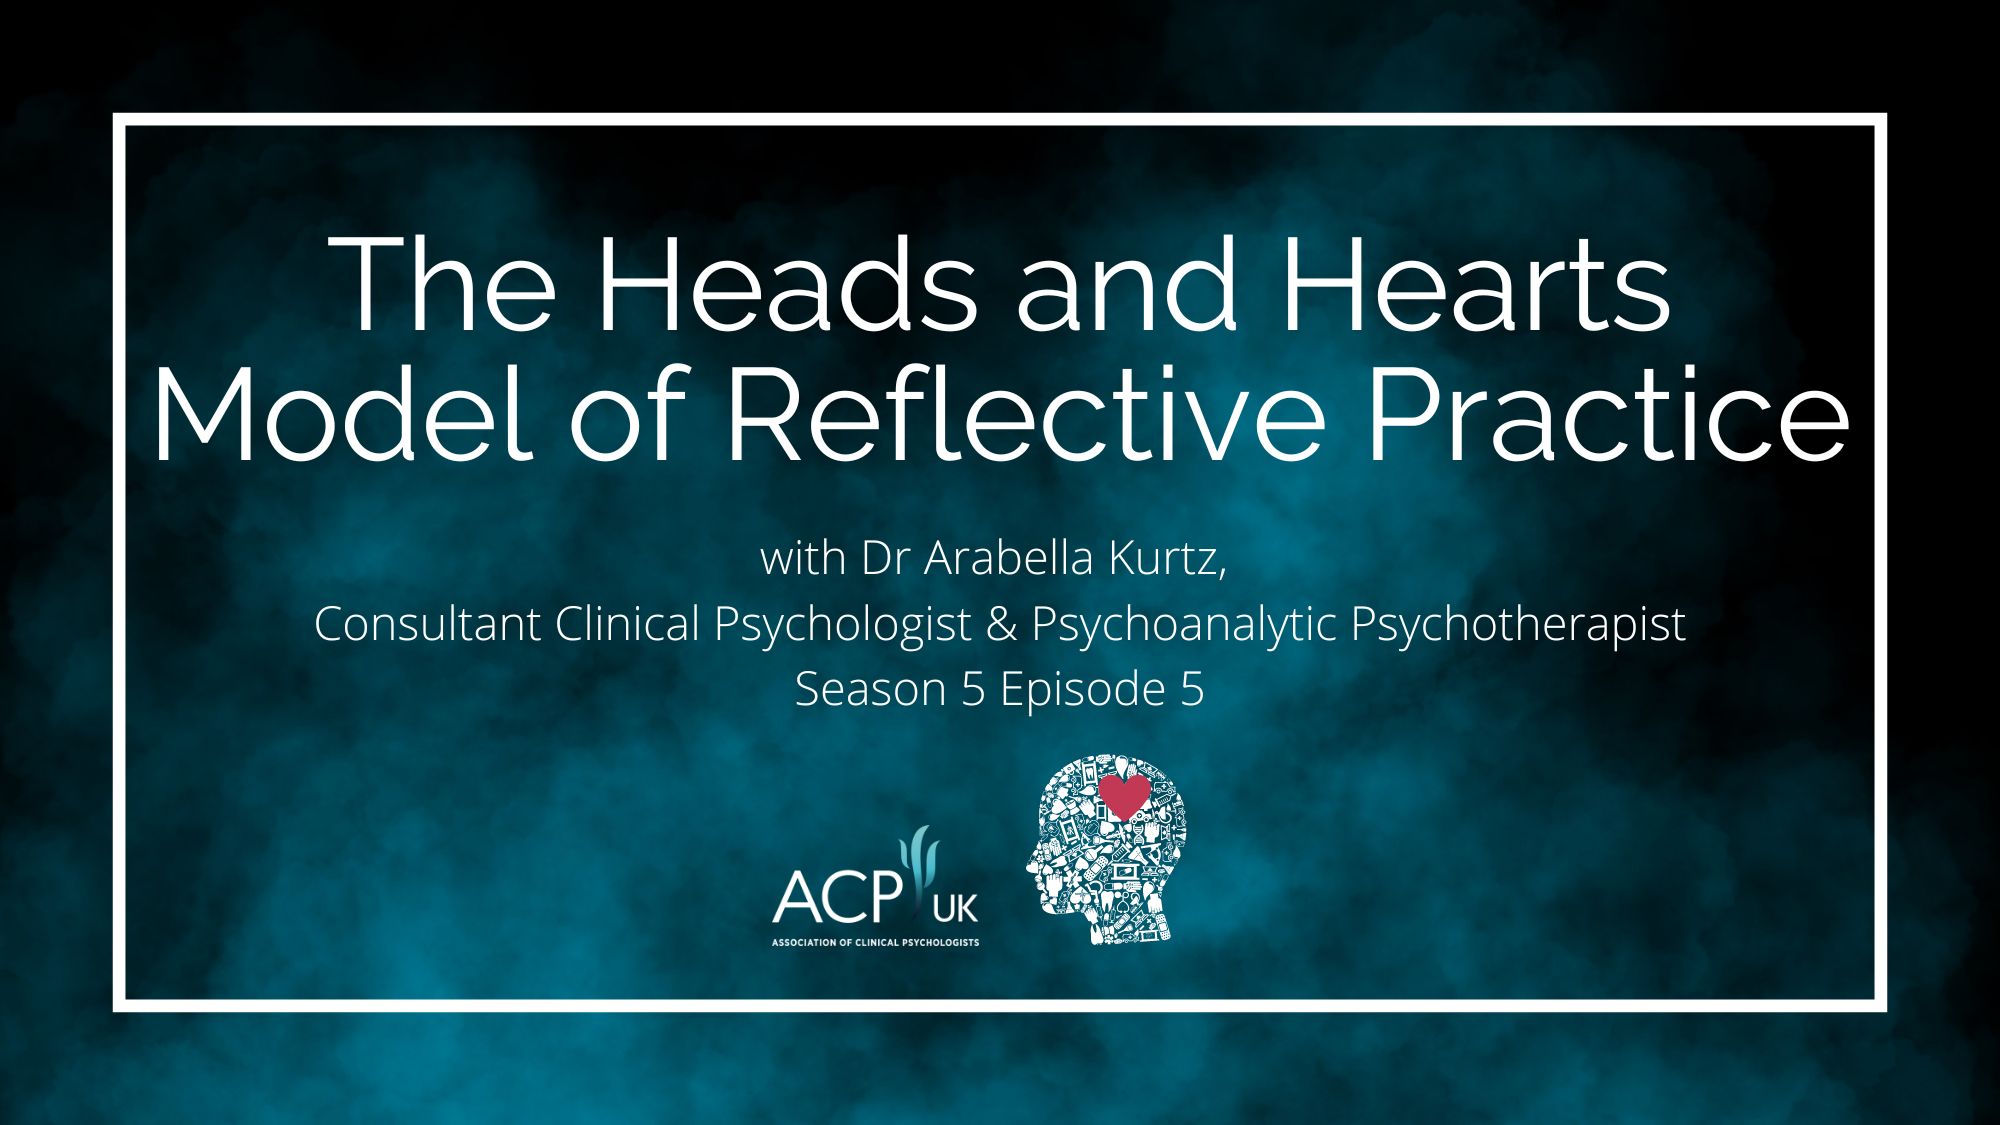 WWH podcast Arabella Kurtz Heads and Hearts Model of Relfective Practice